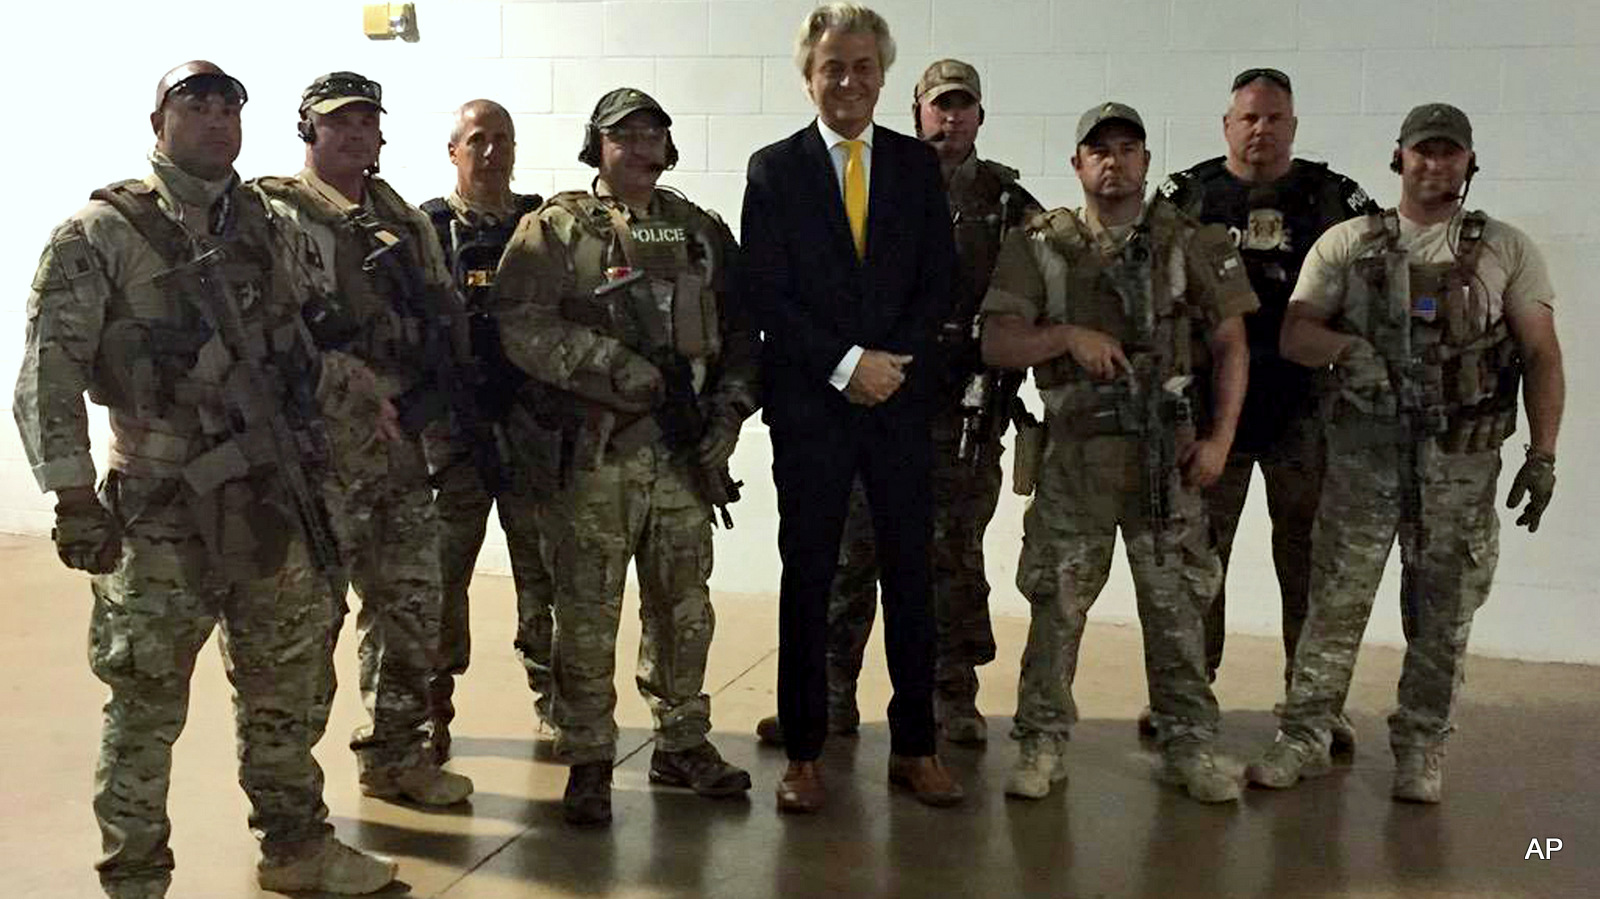 In this photo provided on Monday, May 4, 2015 by Geert Wilders, Dutch lawmaker Geert Wilders, leader of the anti-Islam Freedom Party, center, poses for a photograph with police officers he hired in advance of a provocative contest for cartoon depictions of Prophet Muhammad in Garland, Texas. 